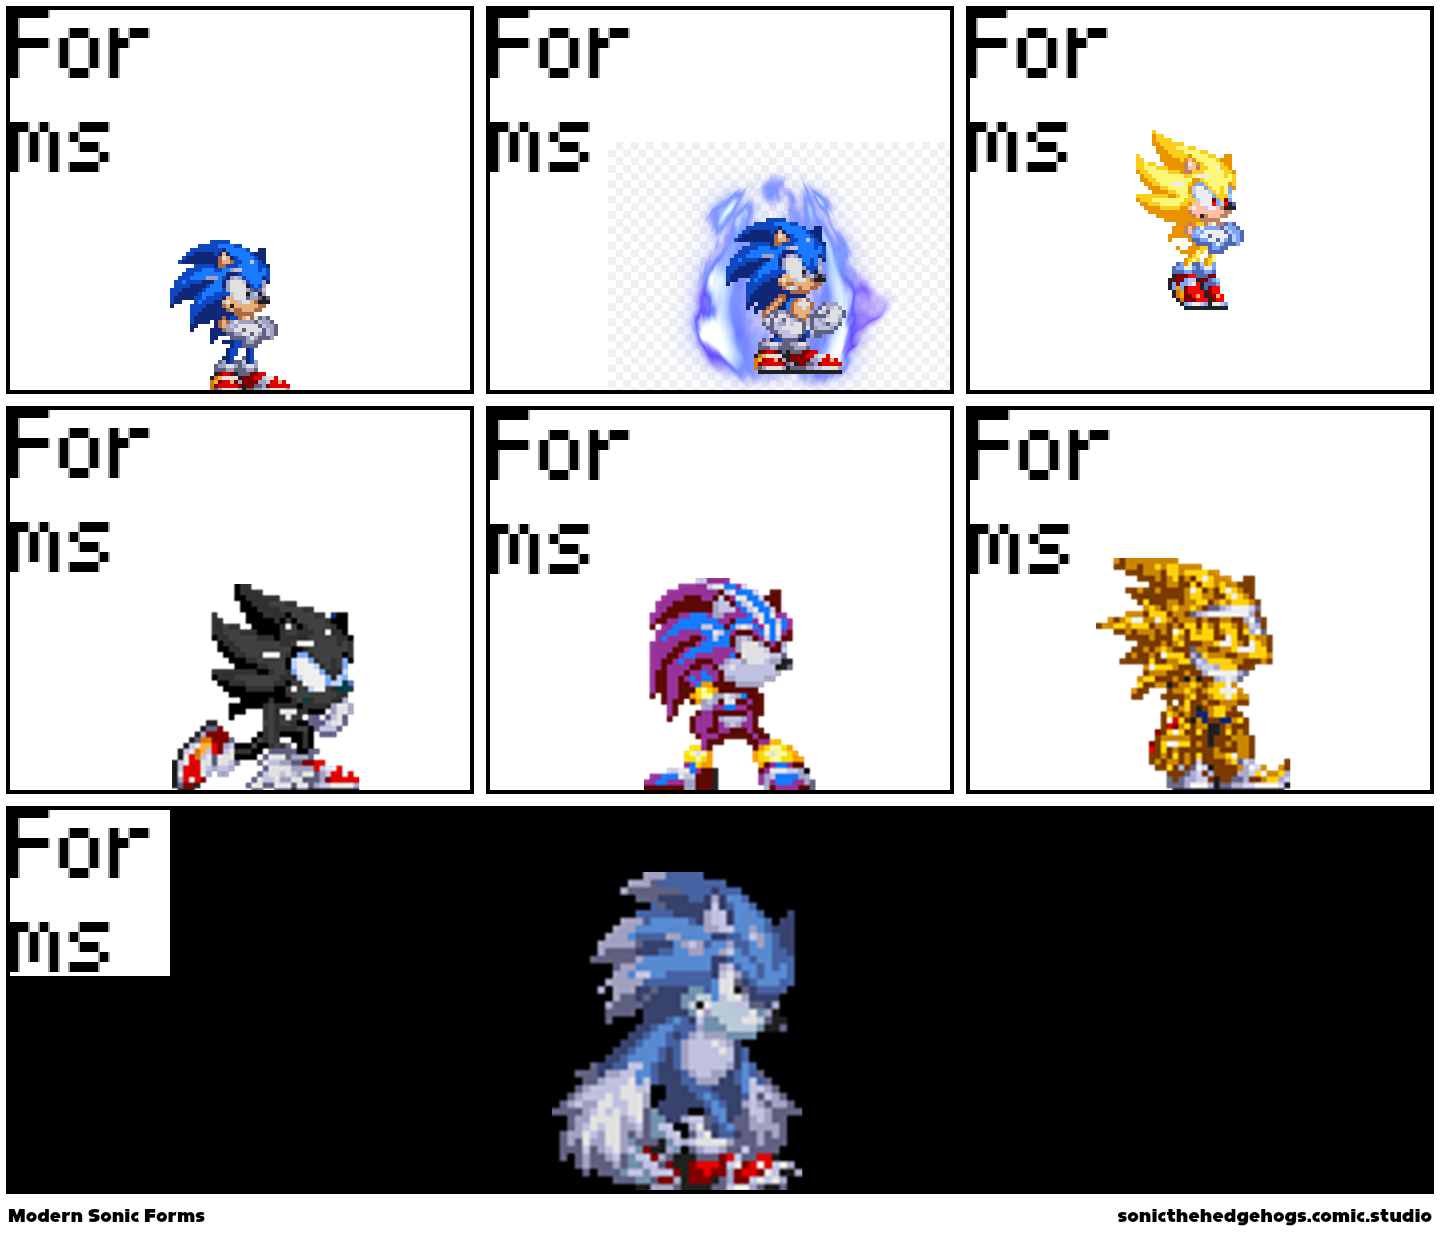 Modern Sonic Forms